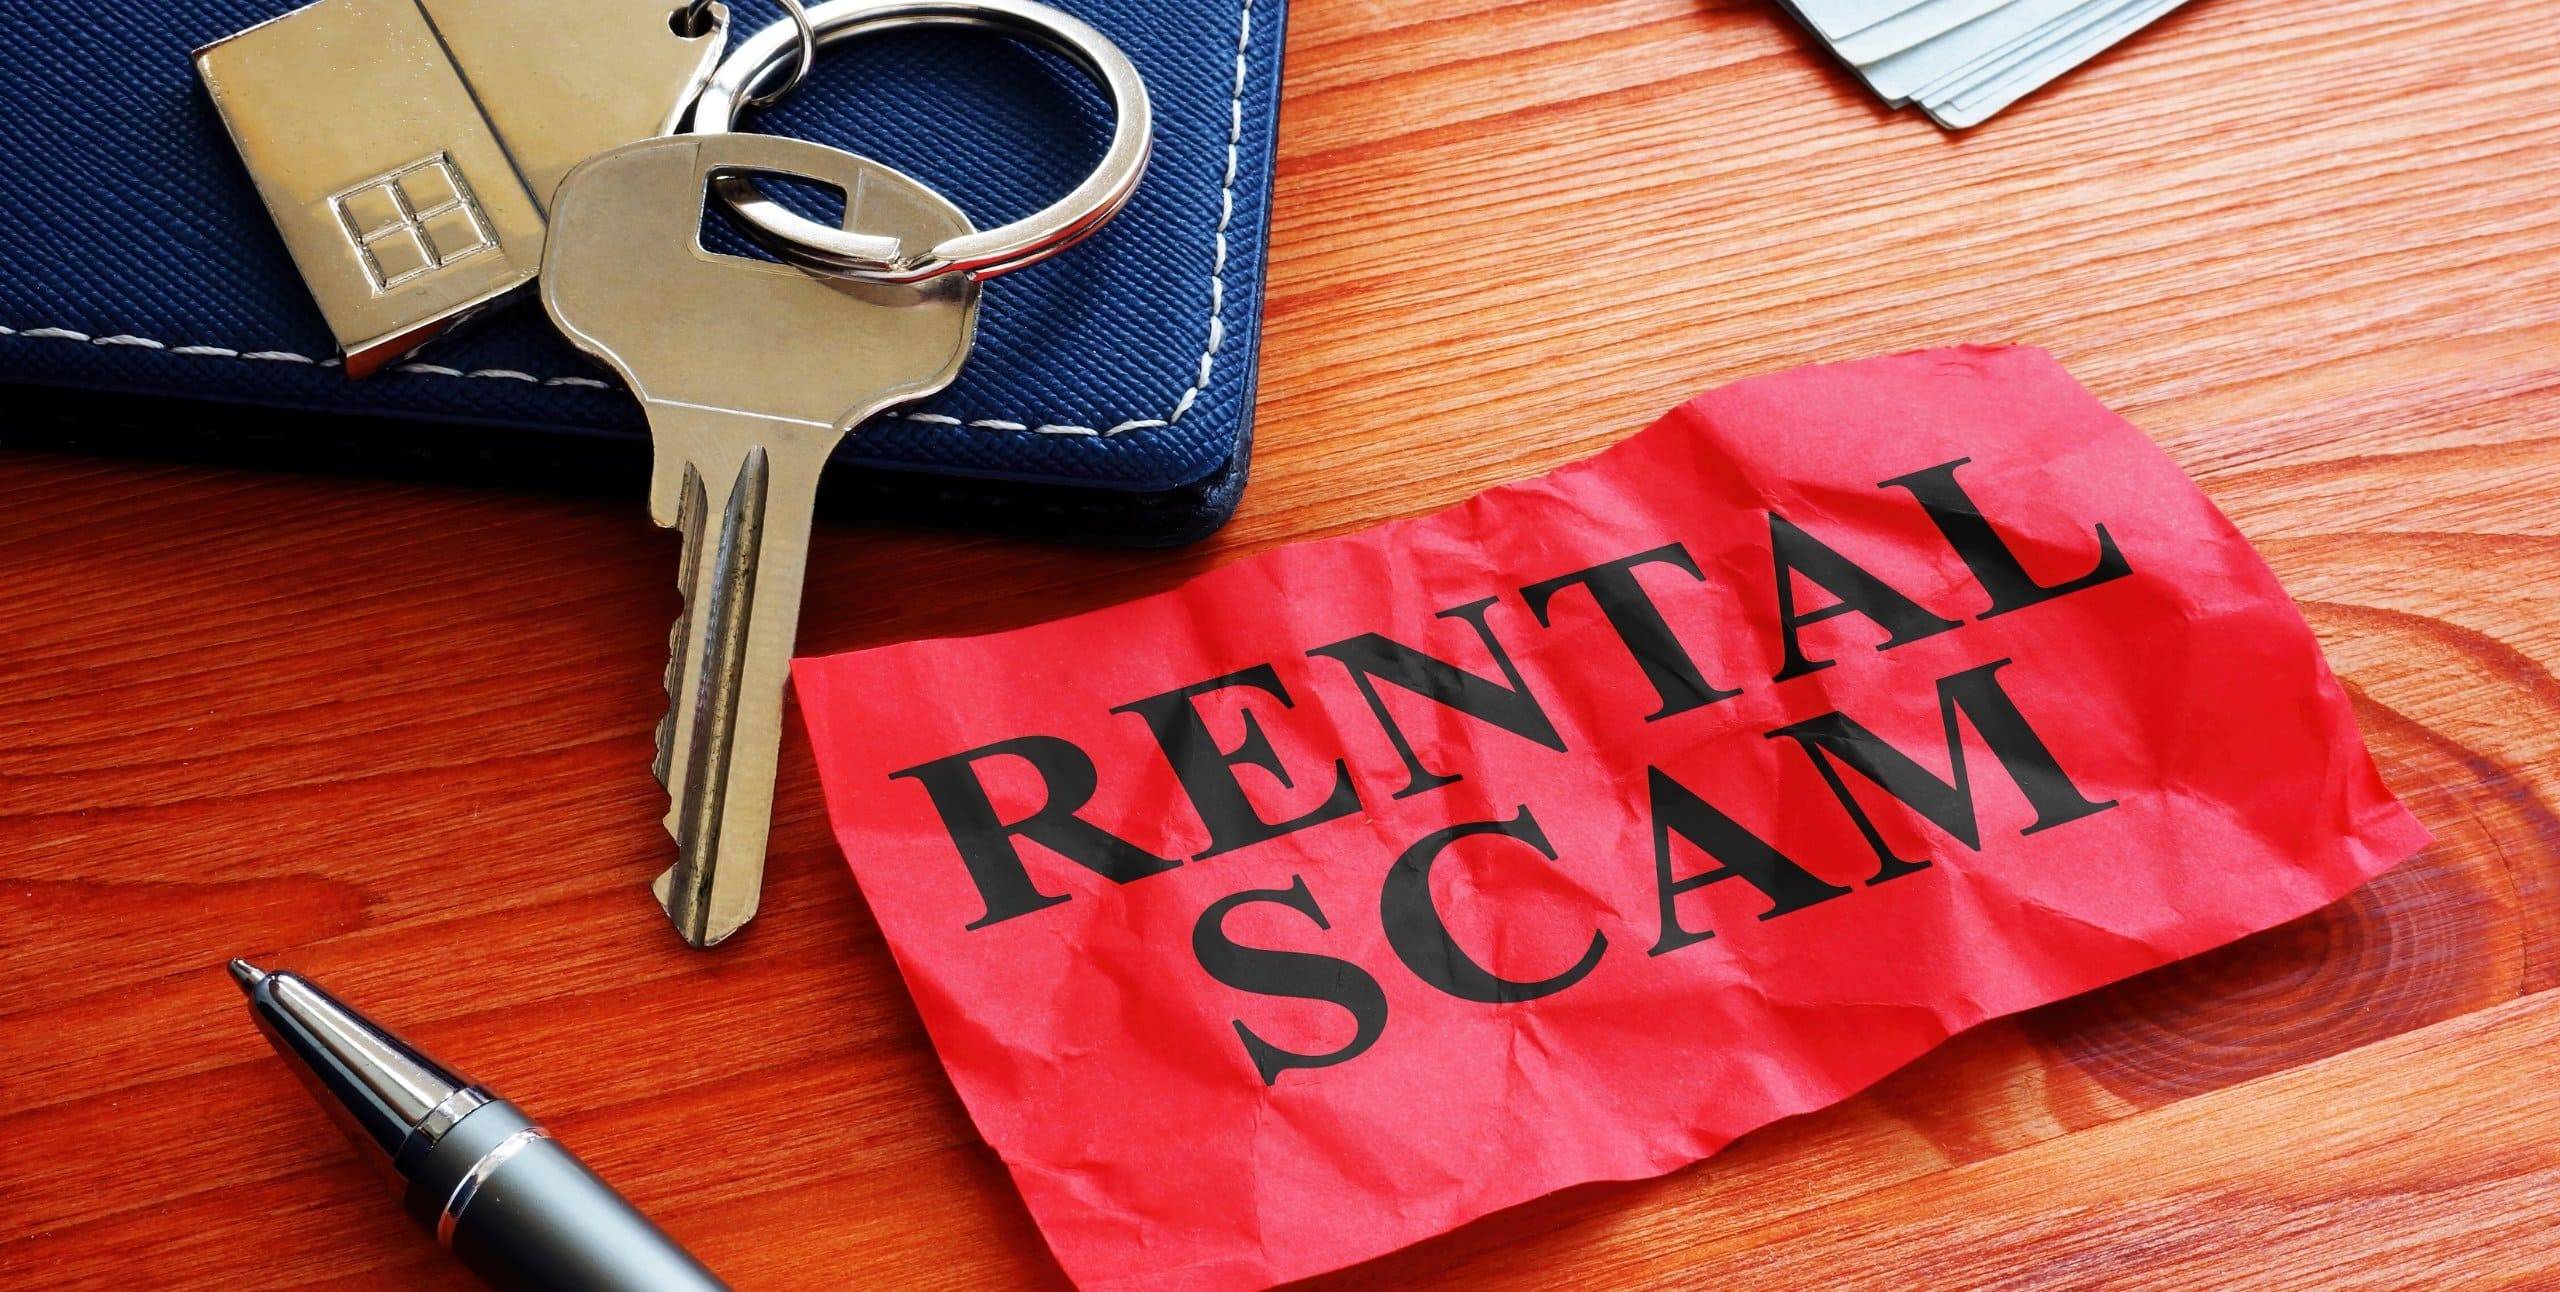 Rental Scams: How Landlords Can Spot and Avoid Them